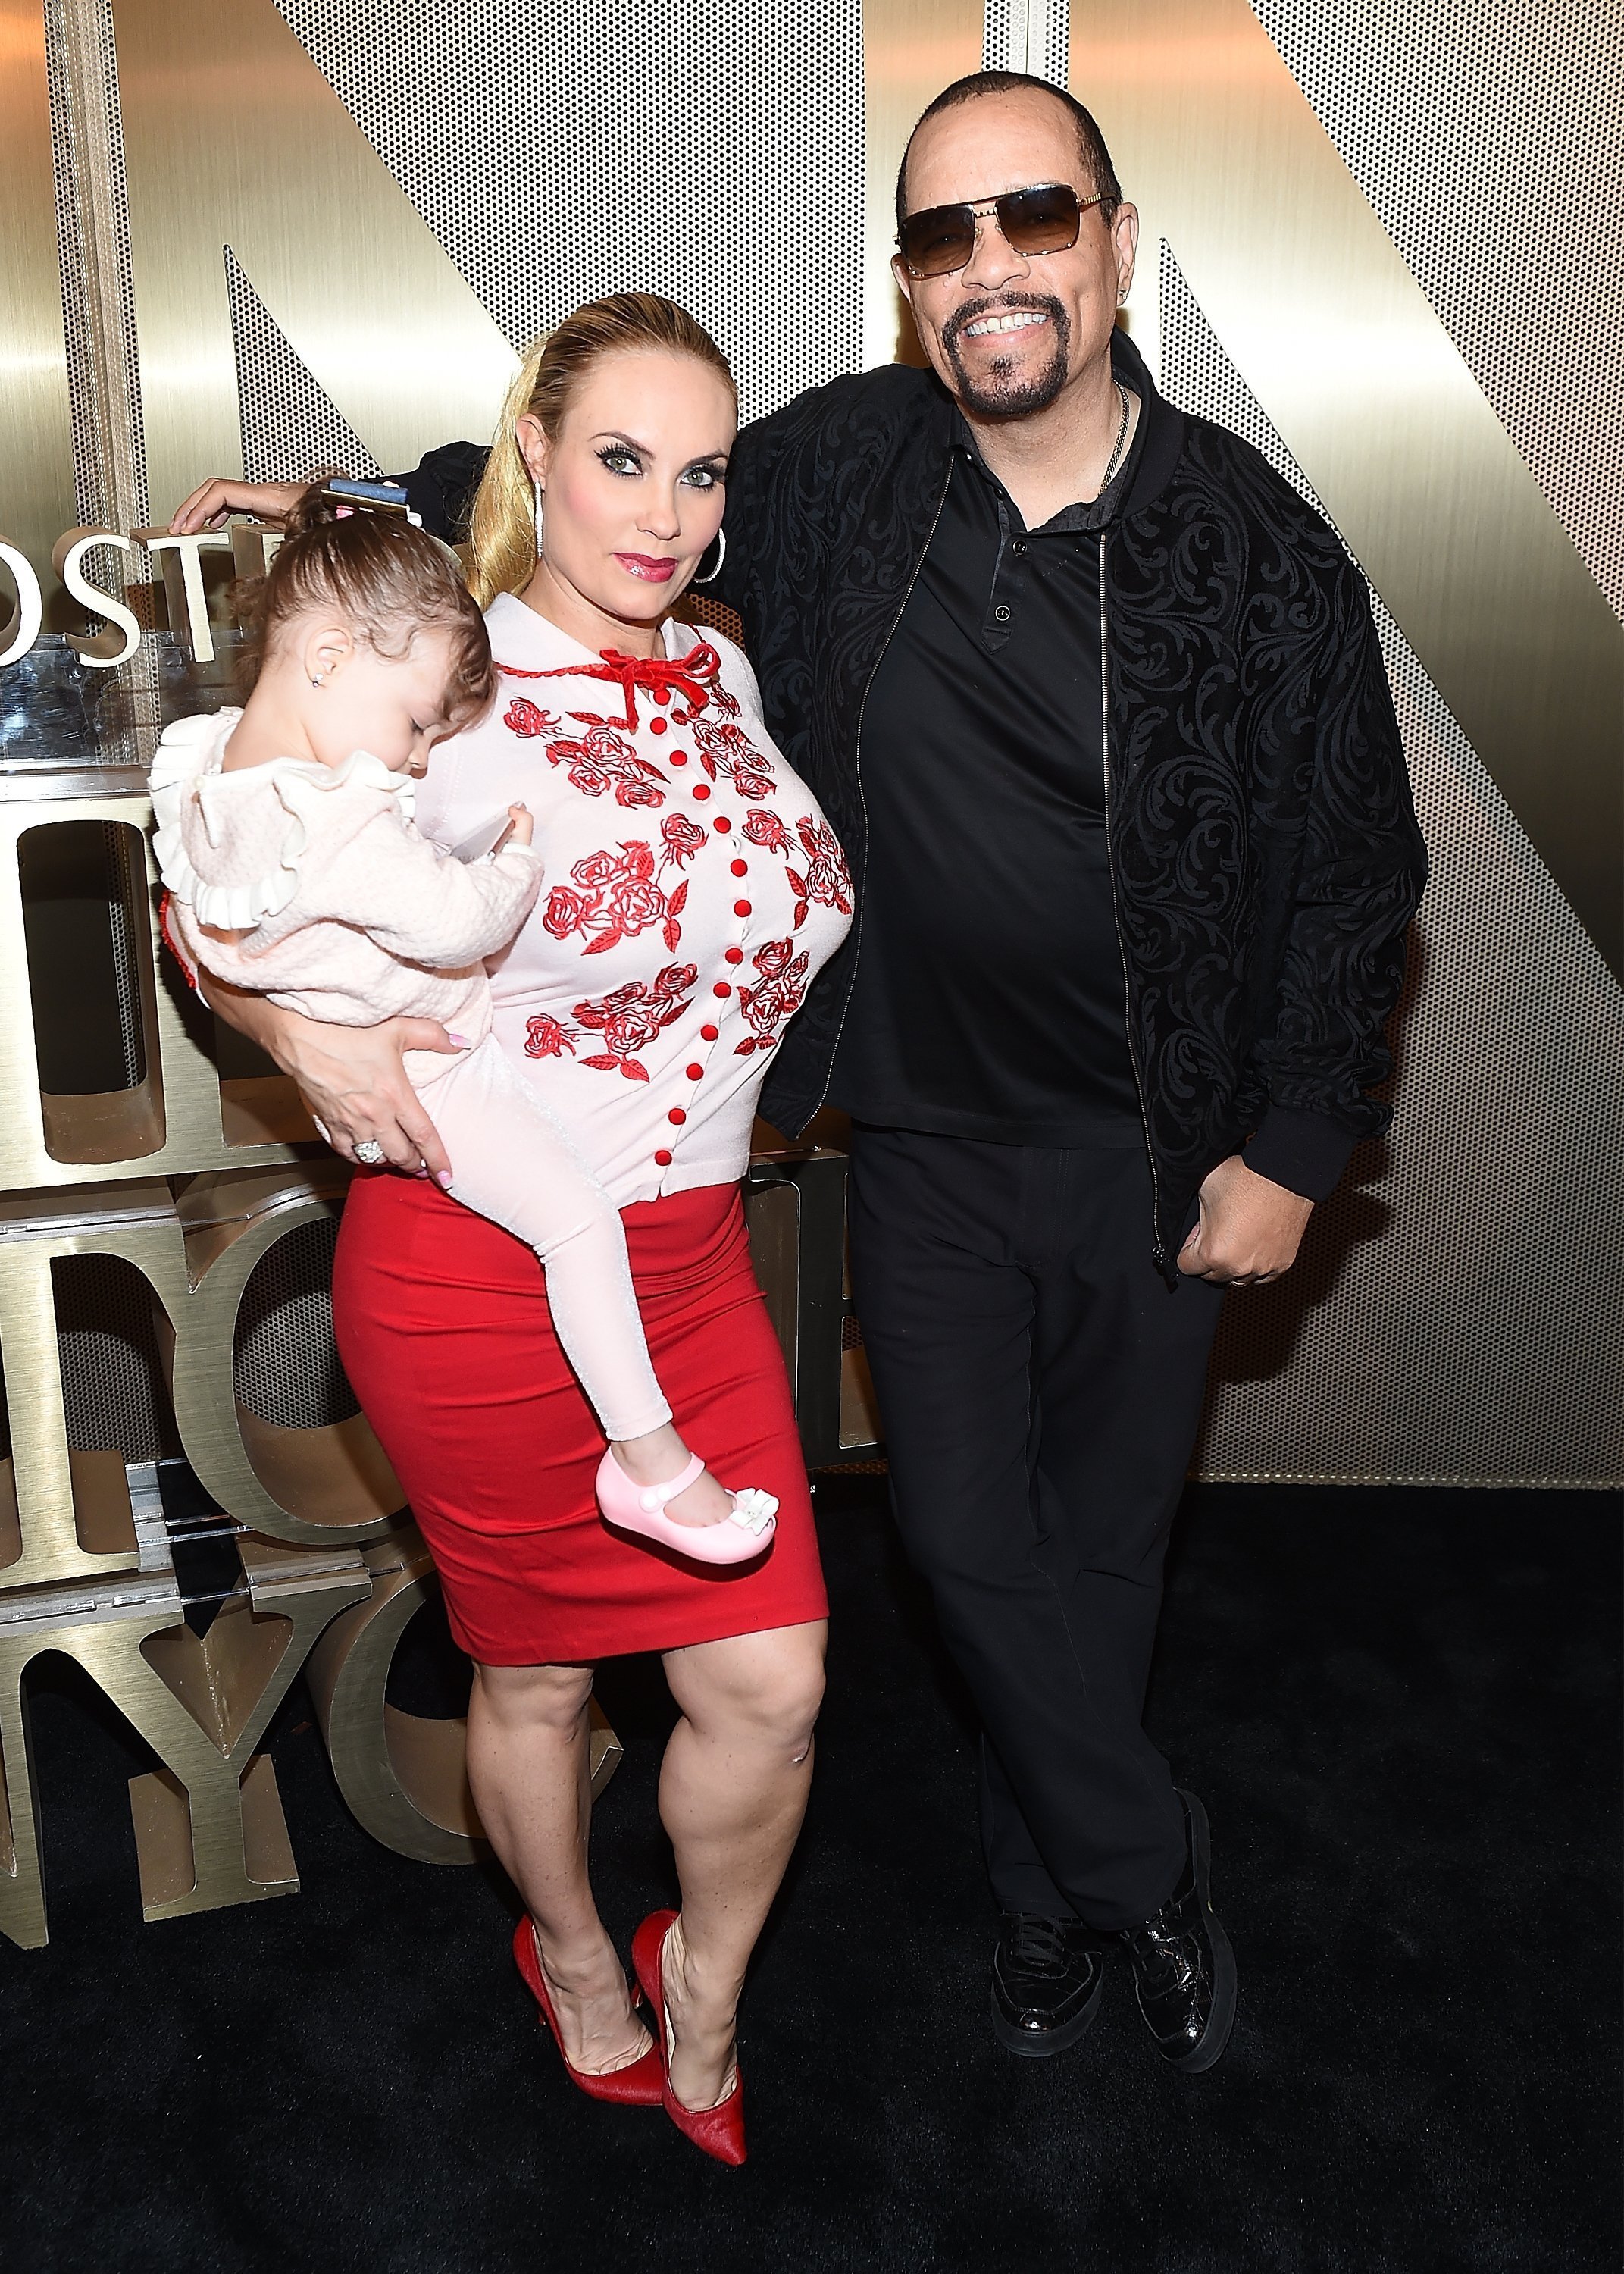 Coco Austin, Chanel, and Ice-T at the Nordstrom Men's NYC store opening on April 10, 2018. | Photo: Getty Images